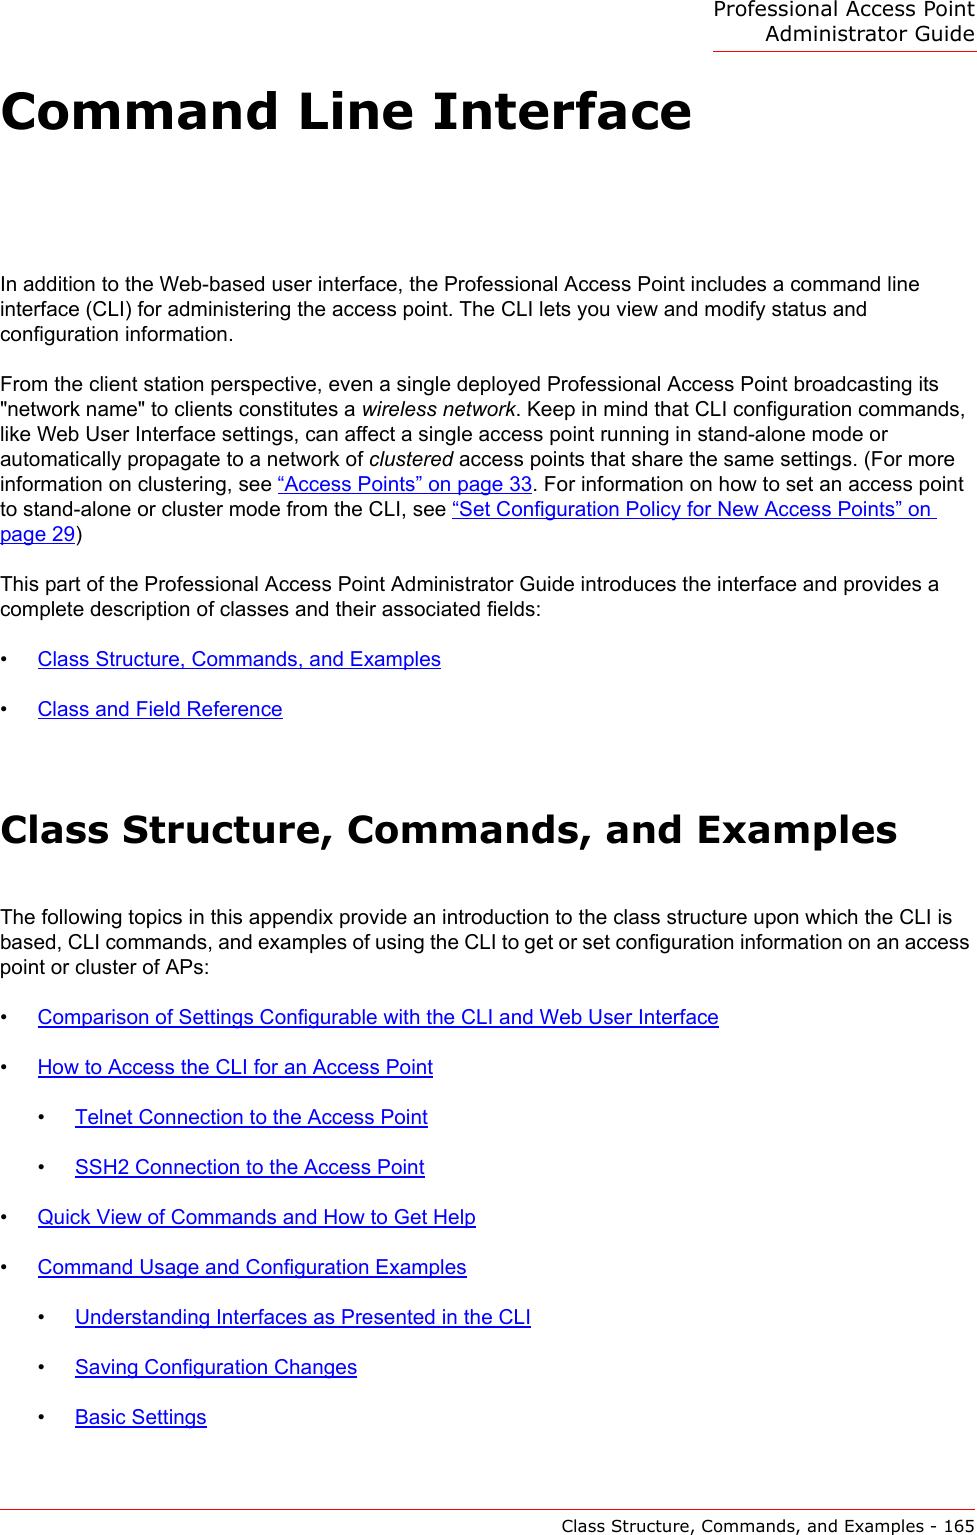 Professional Access Point Administrator GuideClass Structure, Commands, and Examples - 165Command Line InterfaceIn addition to the Web-based user interface, the Professional Access Point includes a command line interface (CLI) for administering the access point. The CLI lets you view and modify status and configuration information.From the client station perspective, even a single deployed Professional Access Point broadcasting its &quot;network name&quot; to clients constitutes a wireless network. Keep in mind that CLI configuration commands, like Web User Interface settings, can affect a single access point running in stand-alone mode or automatically propagate to a network of clustered access points that share the same settings. (For more information on clustering, see “Access Points” on page 33. For information on how to set an access point to stand-alone or cluster mode from the CLI, see “Set Configuration Policy for New Access Points” on page 29)This part of the Professional Access Point Administrator Guide introduces the interface and provides a complete description of classes and their associated fields:•Class Structure, Commands, and Examples•Class and Field ReferenceClass Structure, Commands, and ExamplesThe following topics in this appendix provide an introduction to the class structure upon which the CLI is based, CLI commands, and examples of using the CLI to get or set configuration information on an access point or cluster of APs:•Comparison of Settings Configurable with the CLI and Web User Interface•How to Access the CLI for an Access Point•Telnet Connection to the Access Point•SSH2 Connection to the Access Point•Quick View of Commands and How to Get Help•Command Usage and Configuration Examples•Understanding Interfaces as Presented in the CLI•Saving Configuration Changes•Basic Settings